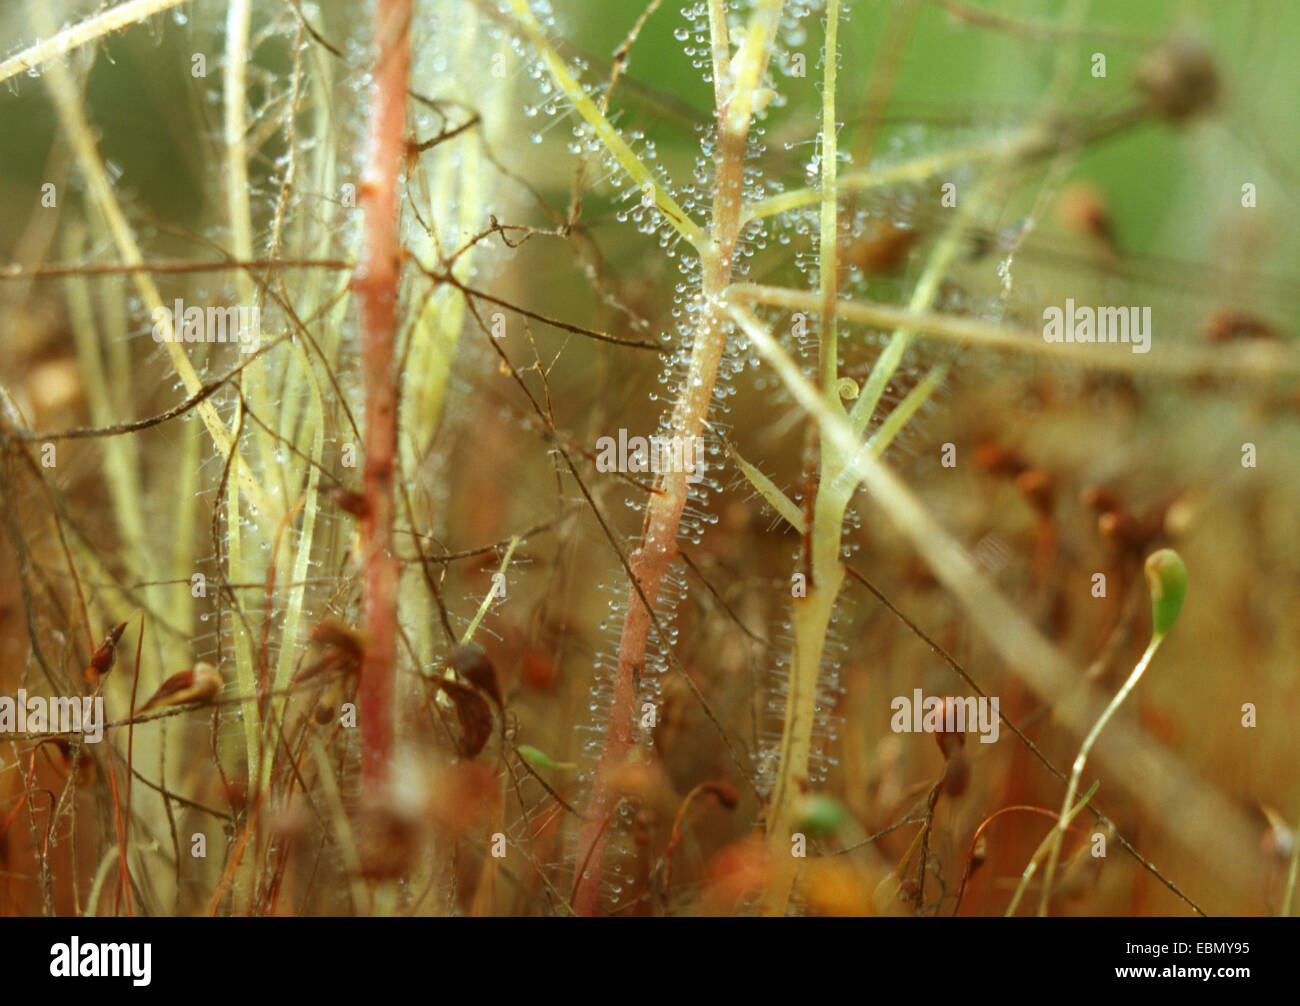 Rainbow Plant (Byblis liniflora), leaves with glands Stock Photo